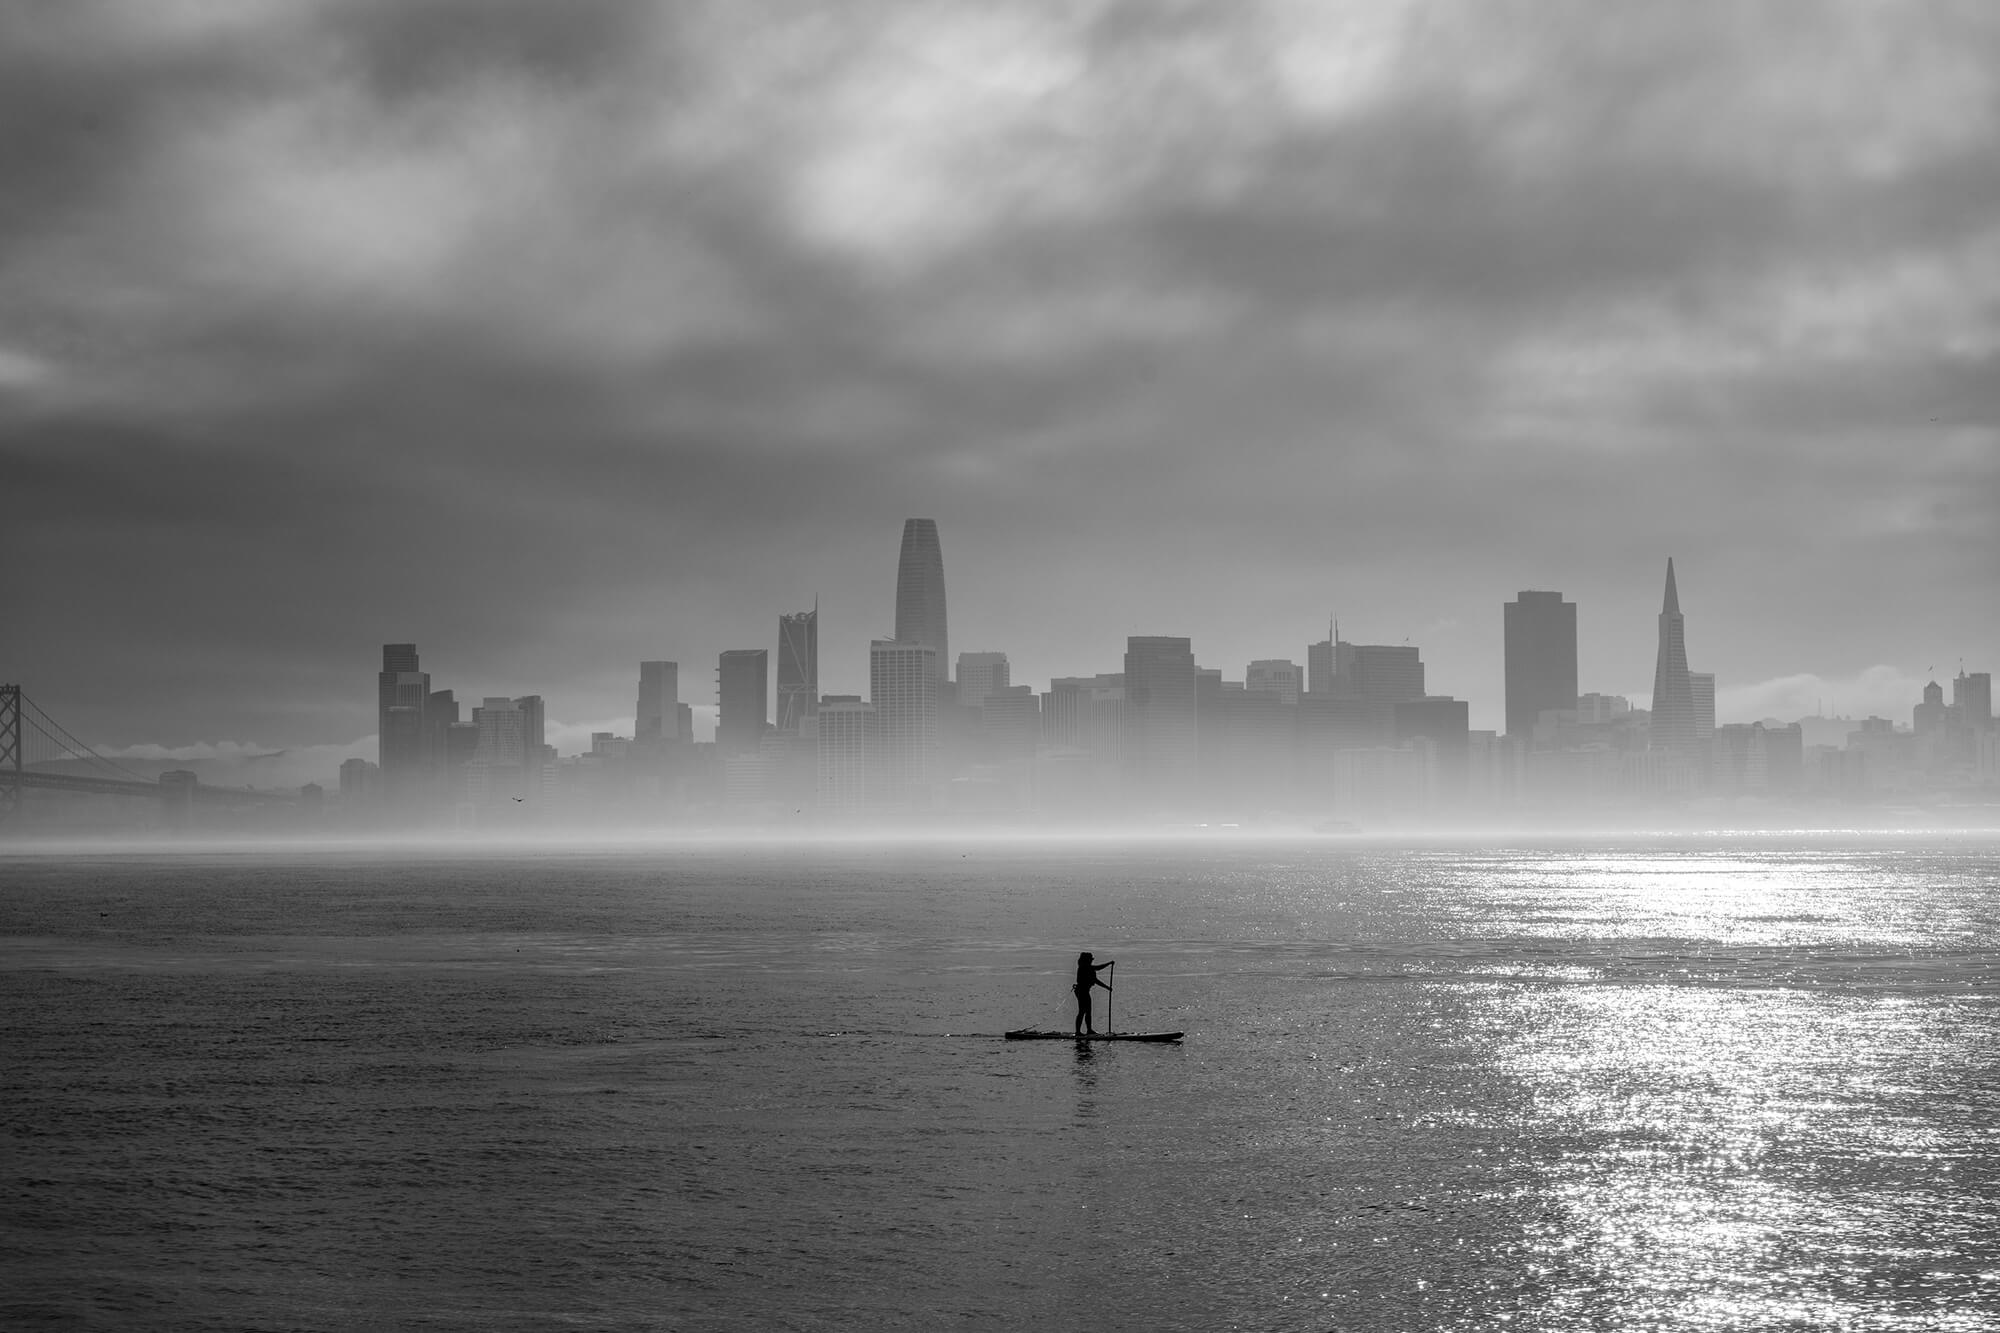 Woman Paddle Boarding On A Foggy Day With The Silhouette Of The San Francisco Cityscape Behind Her